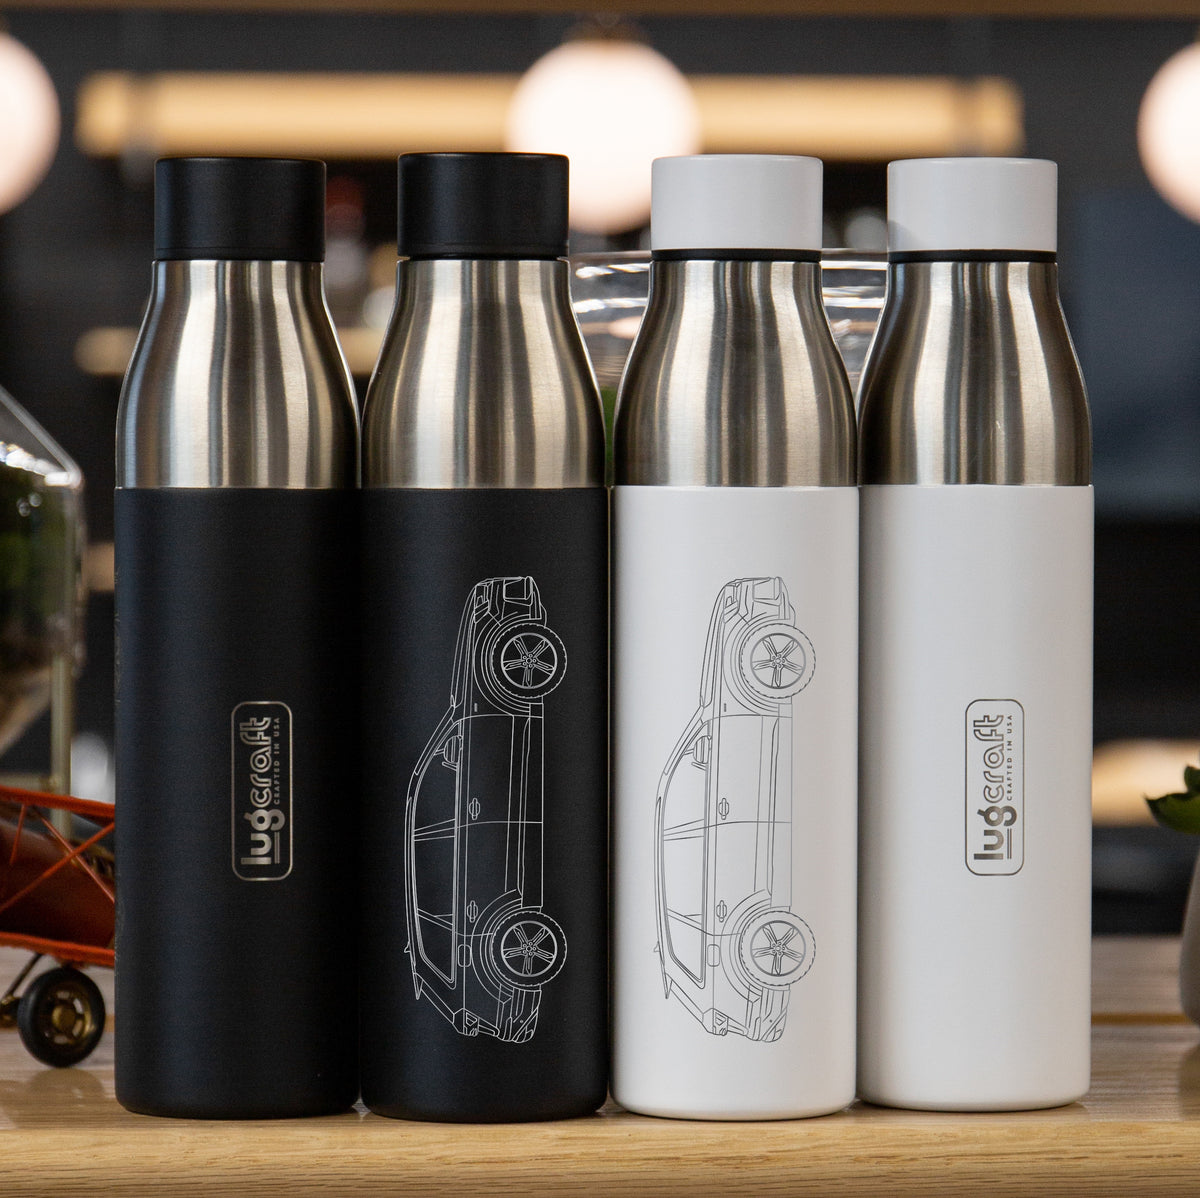 Audi Q7 Insulated Stainless Steel Water Bottle - 21 oz